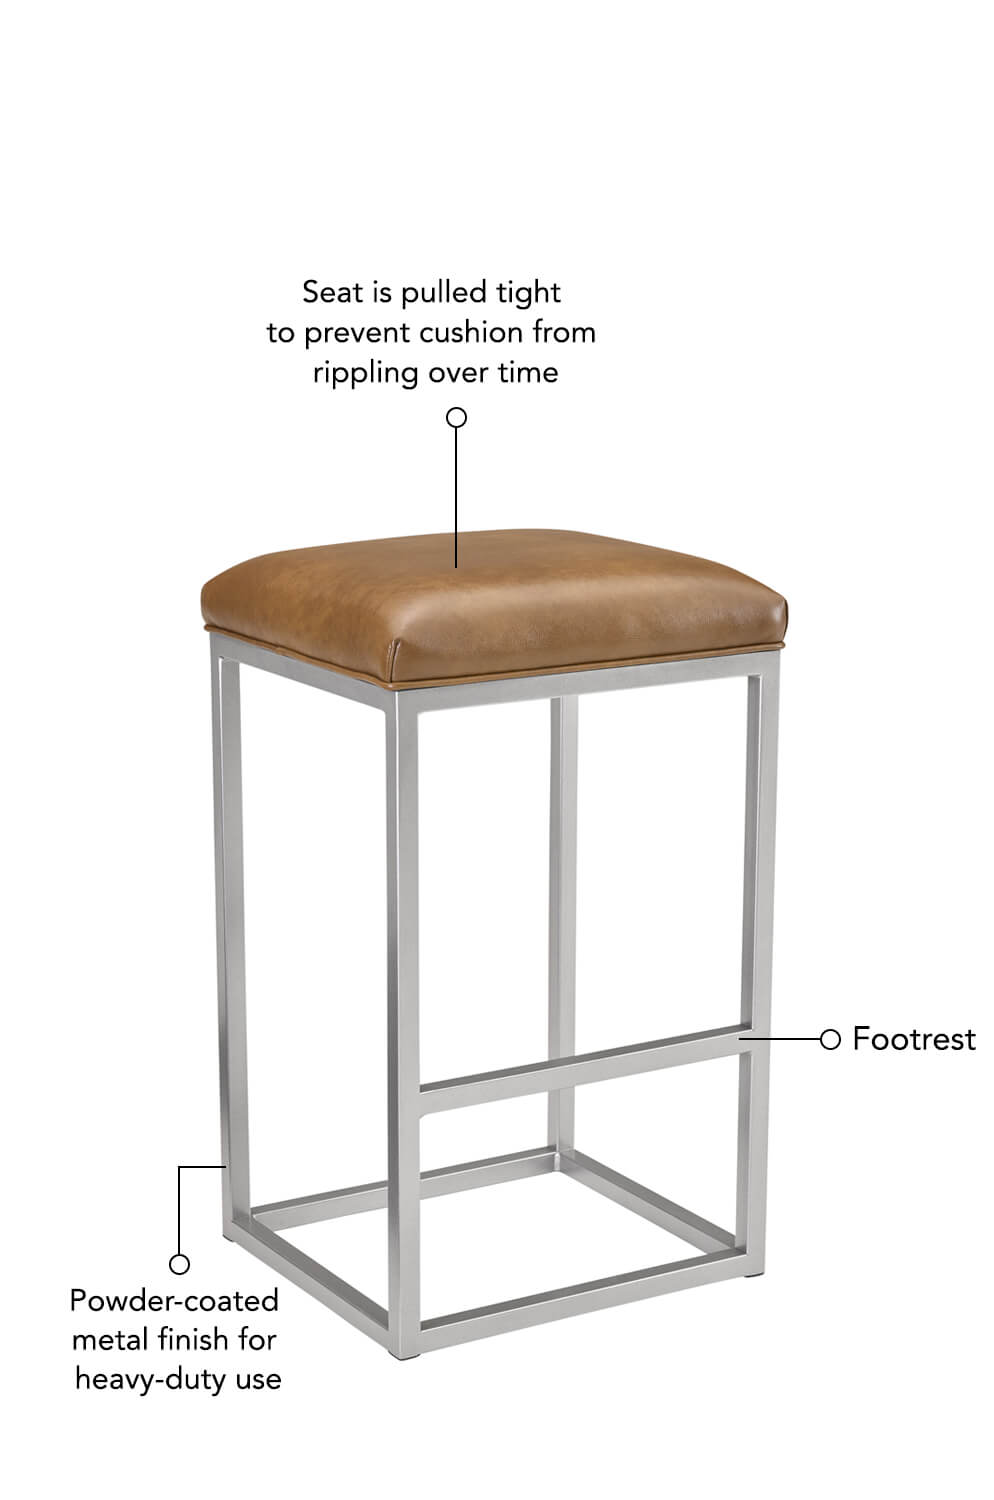 Seat is pulled tight to prevent cushion from rippling over time, powder-coated metal finish for heavy duty use, and solid metal footrest make this stool a winner!